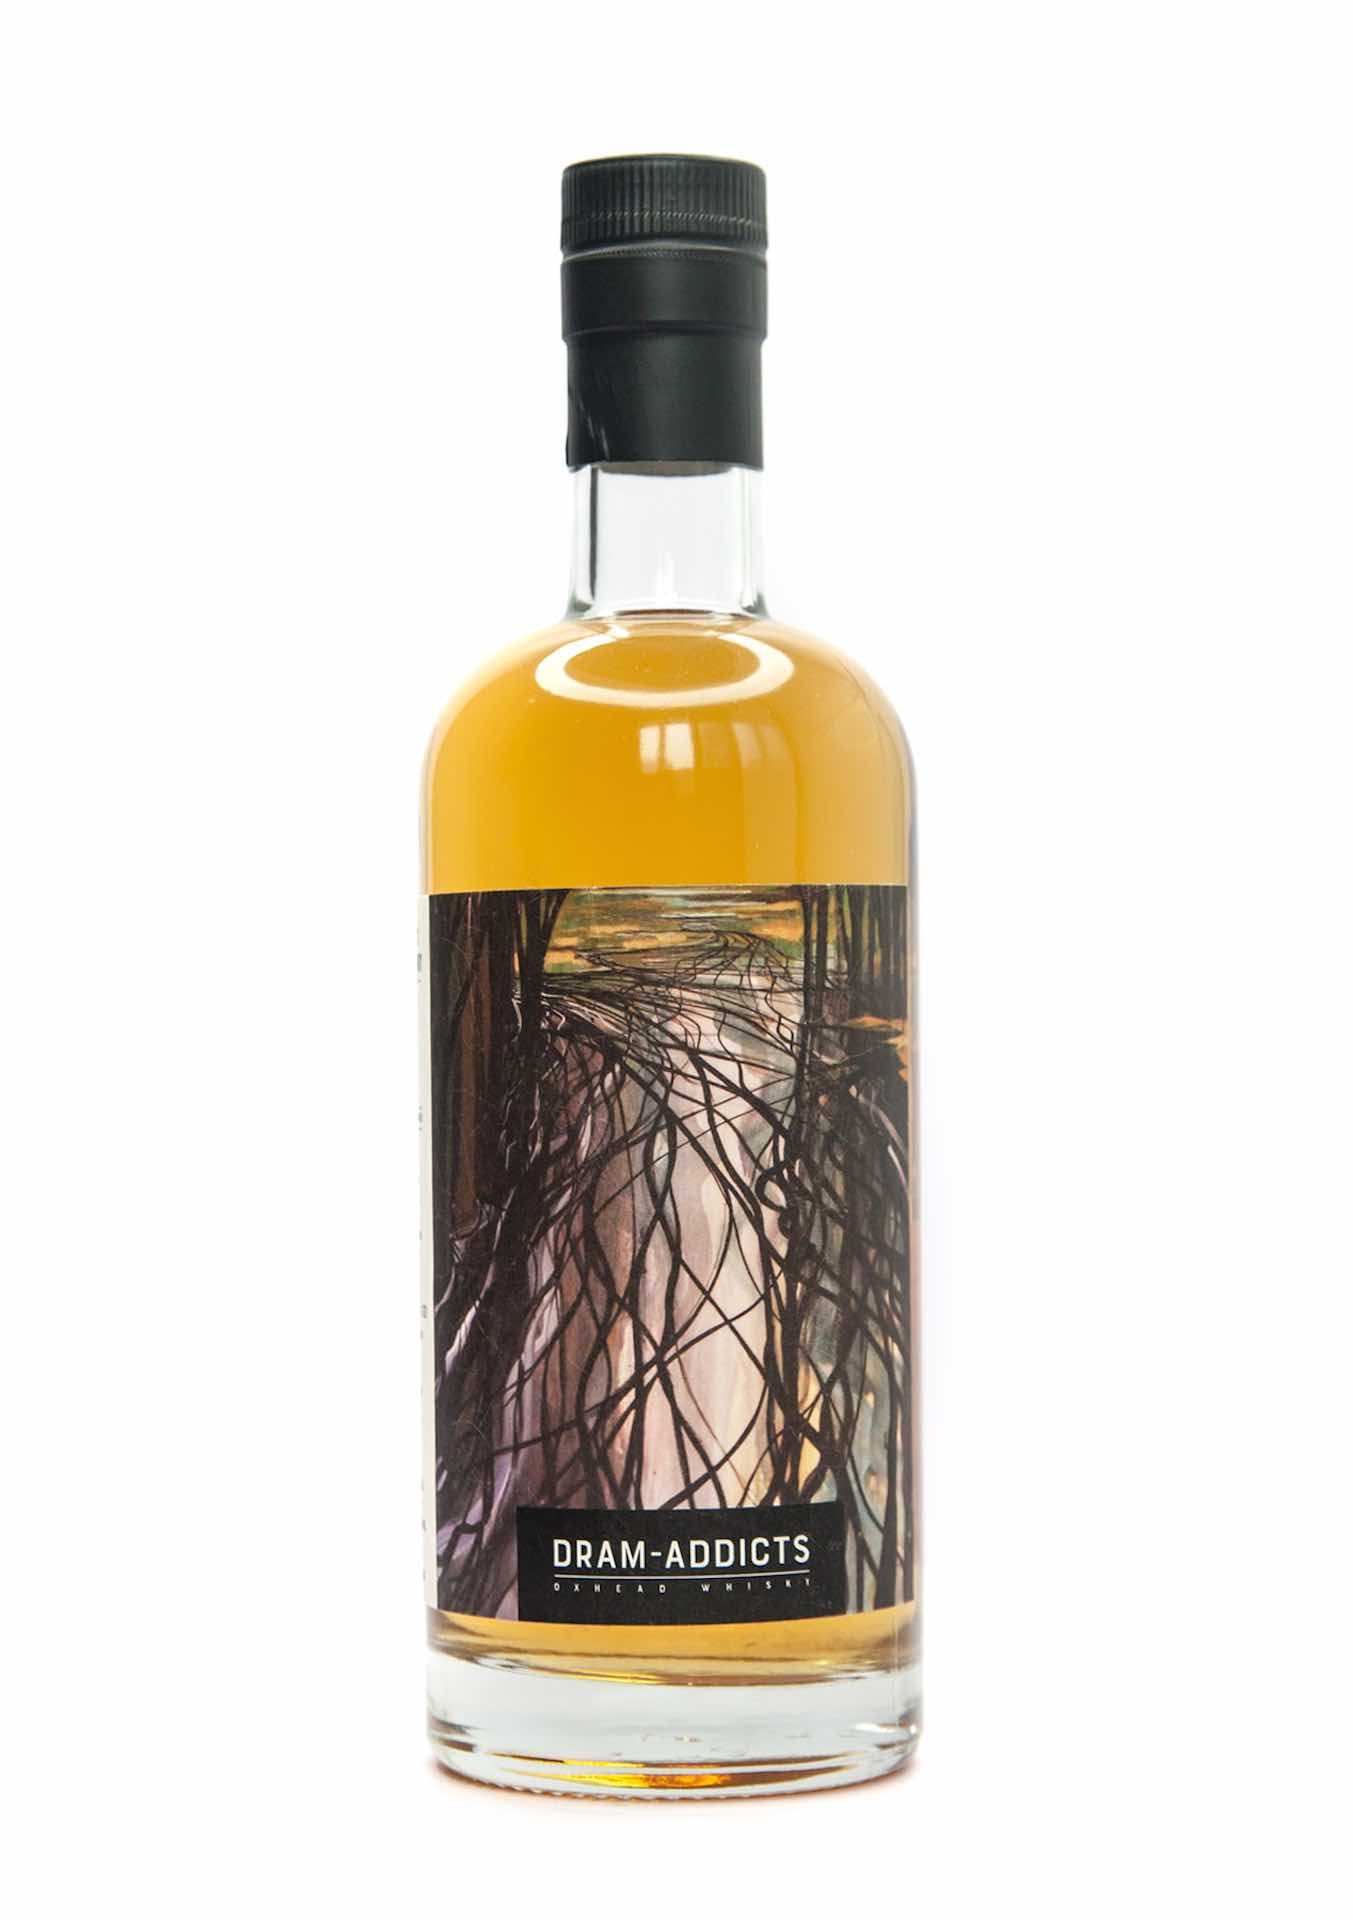 Oxhead Dram-Addicts: Bowmore 24 Year Old